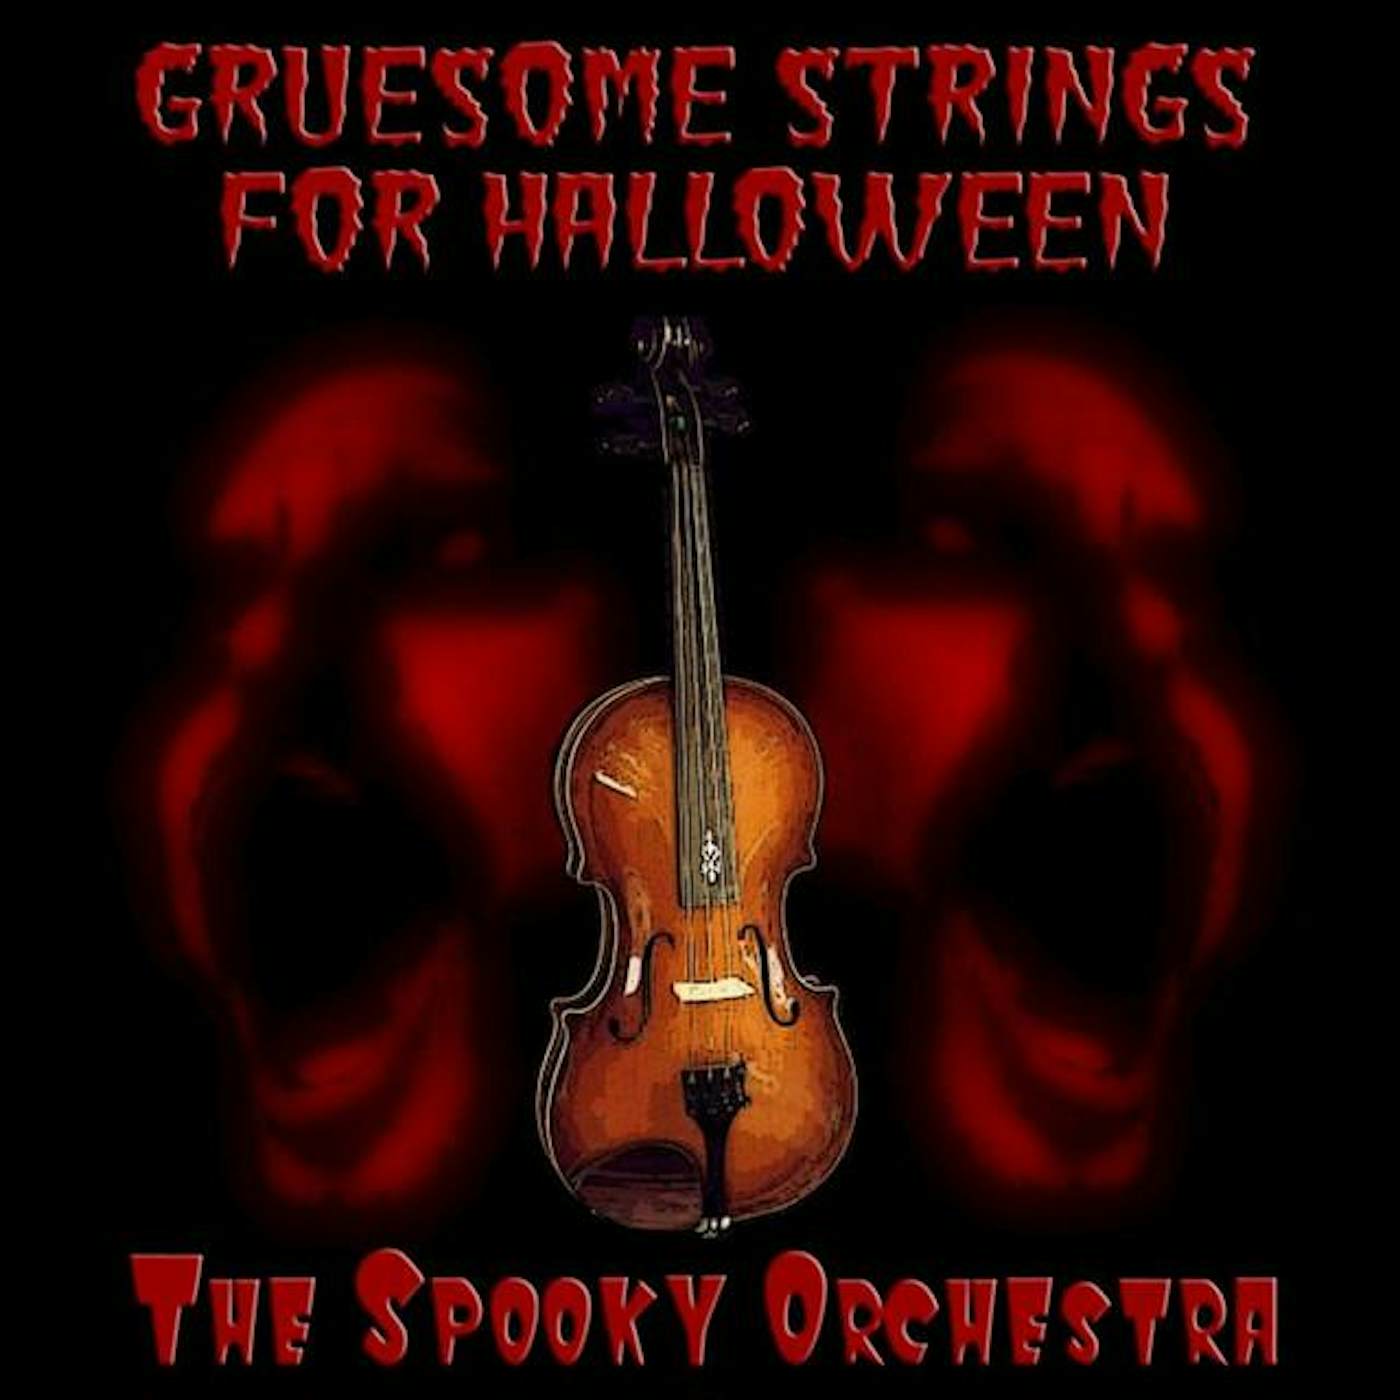 The Spooky Orchestra